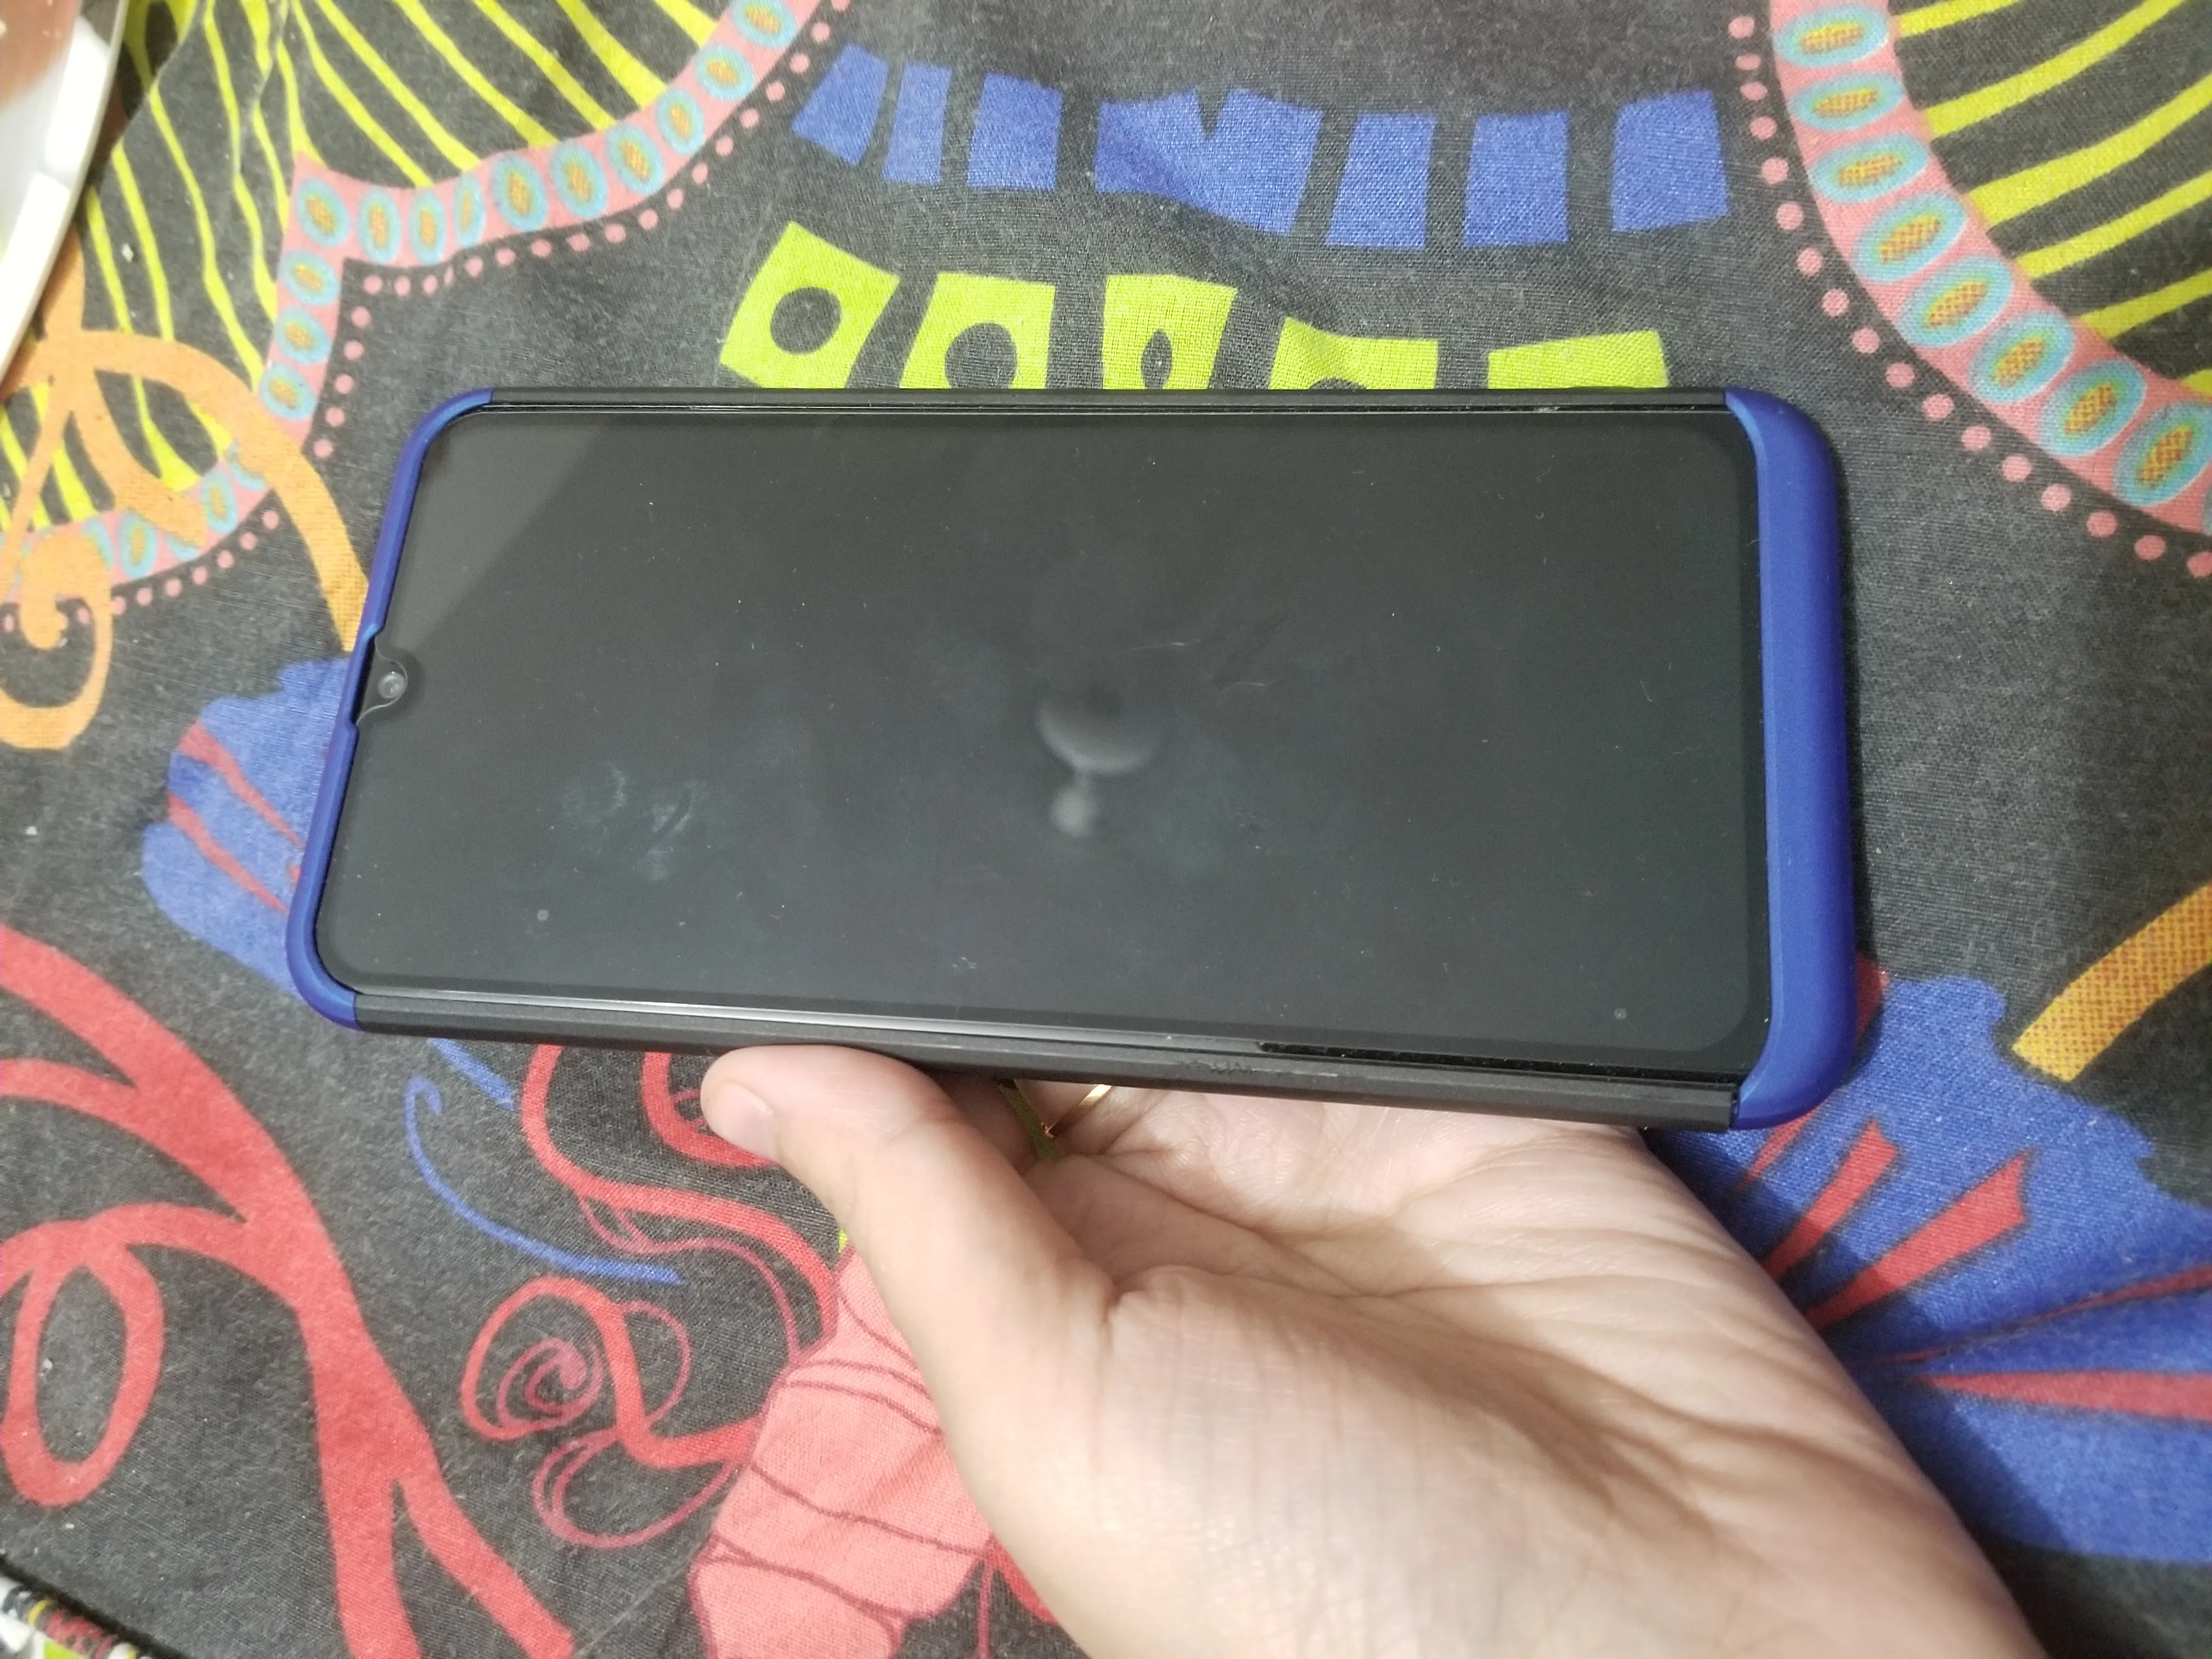 Samsung A30 in mint condition - photo 3